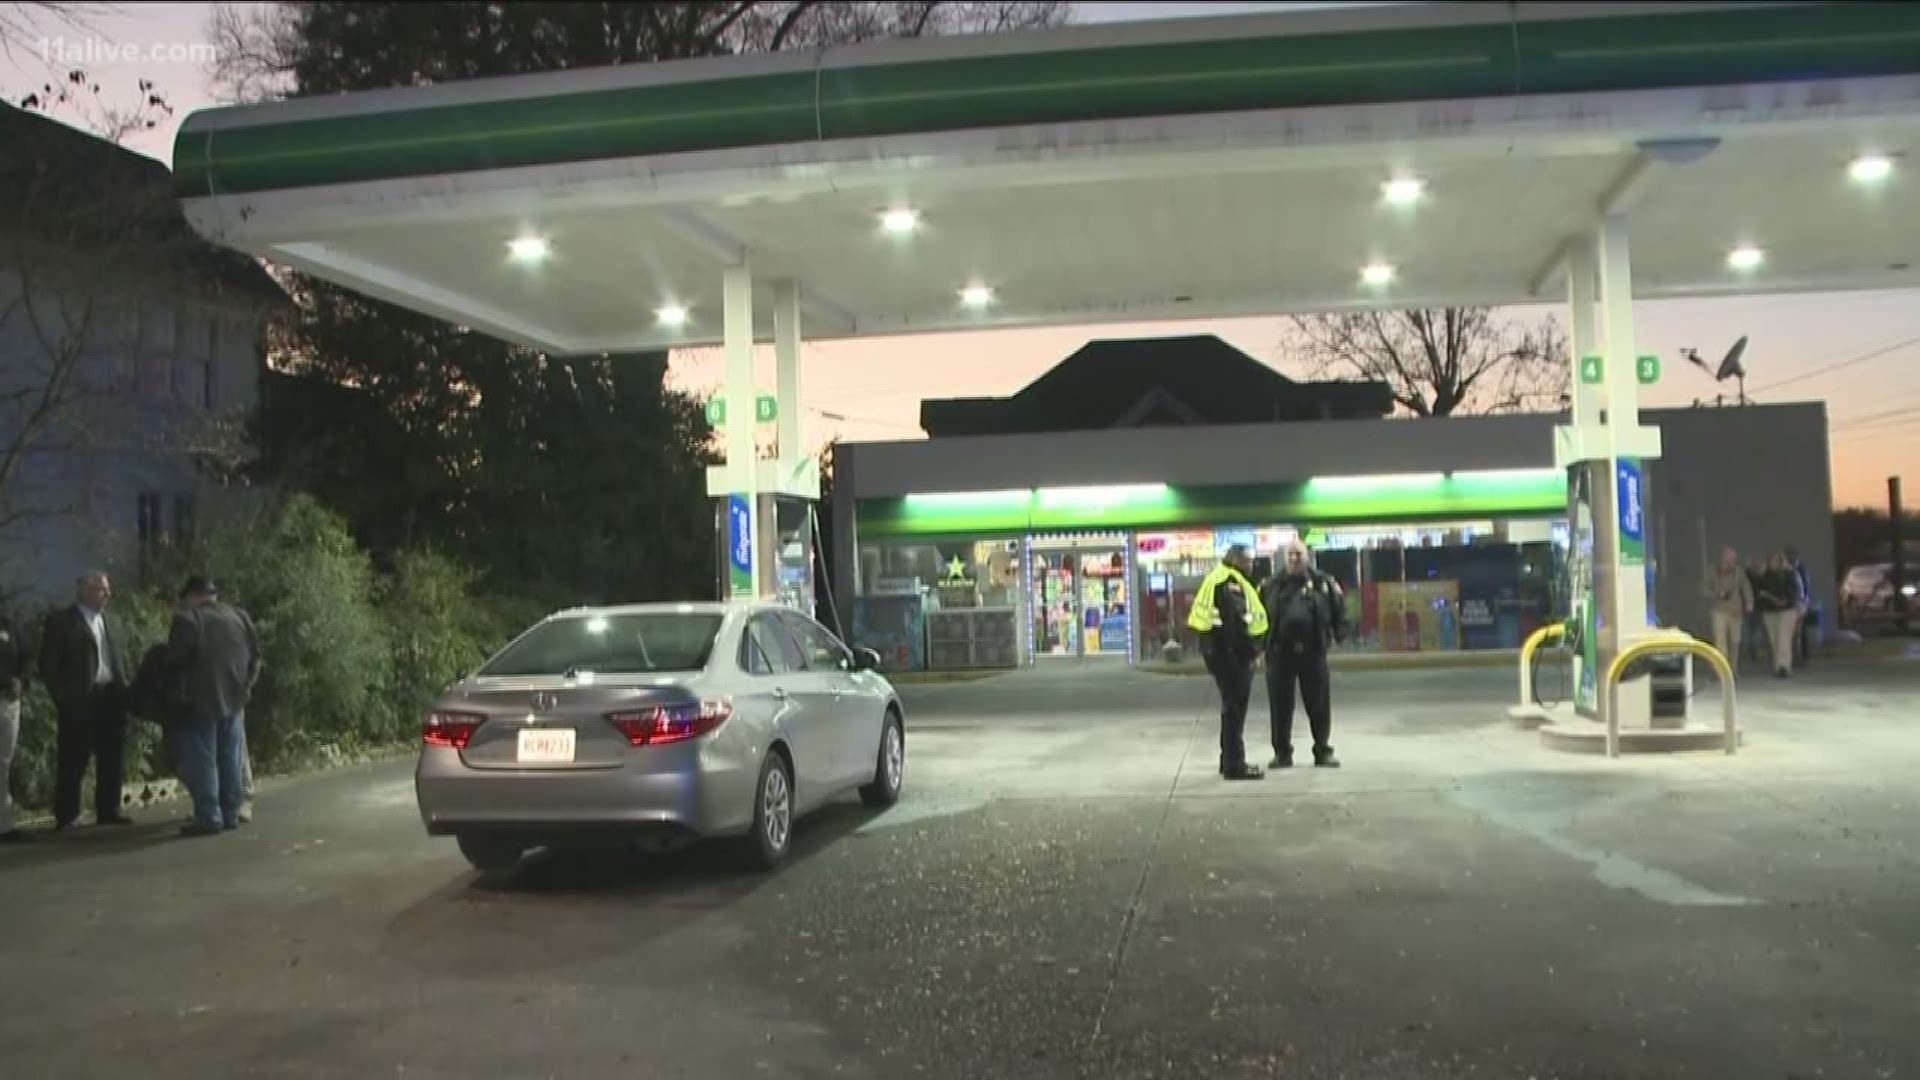 An officer was shot and woman killed after a confrontation in front of the BP gas station in Calhoun at the corner of Wall and E Line streets.